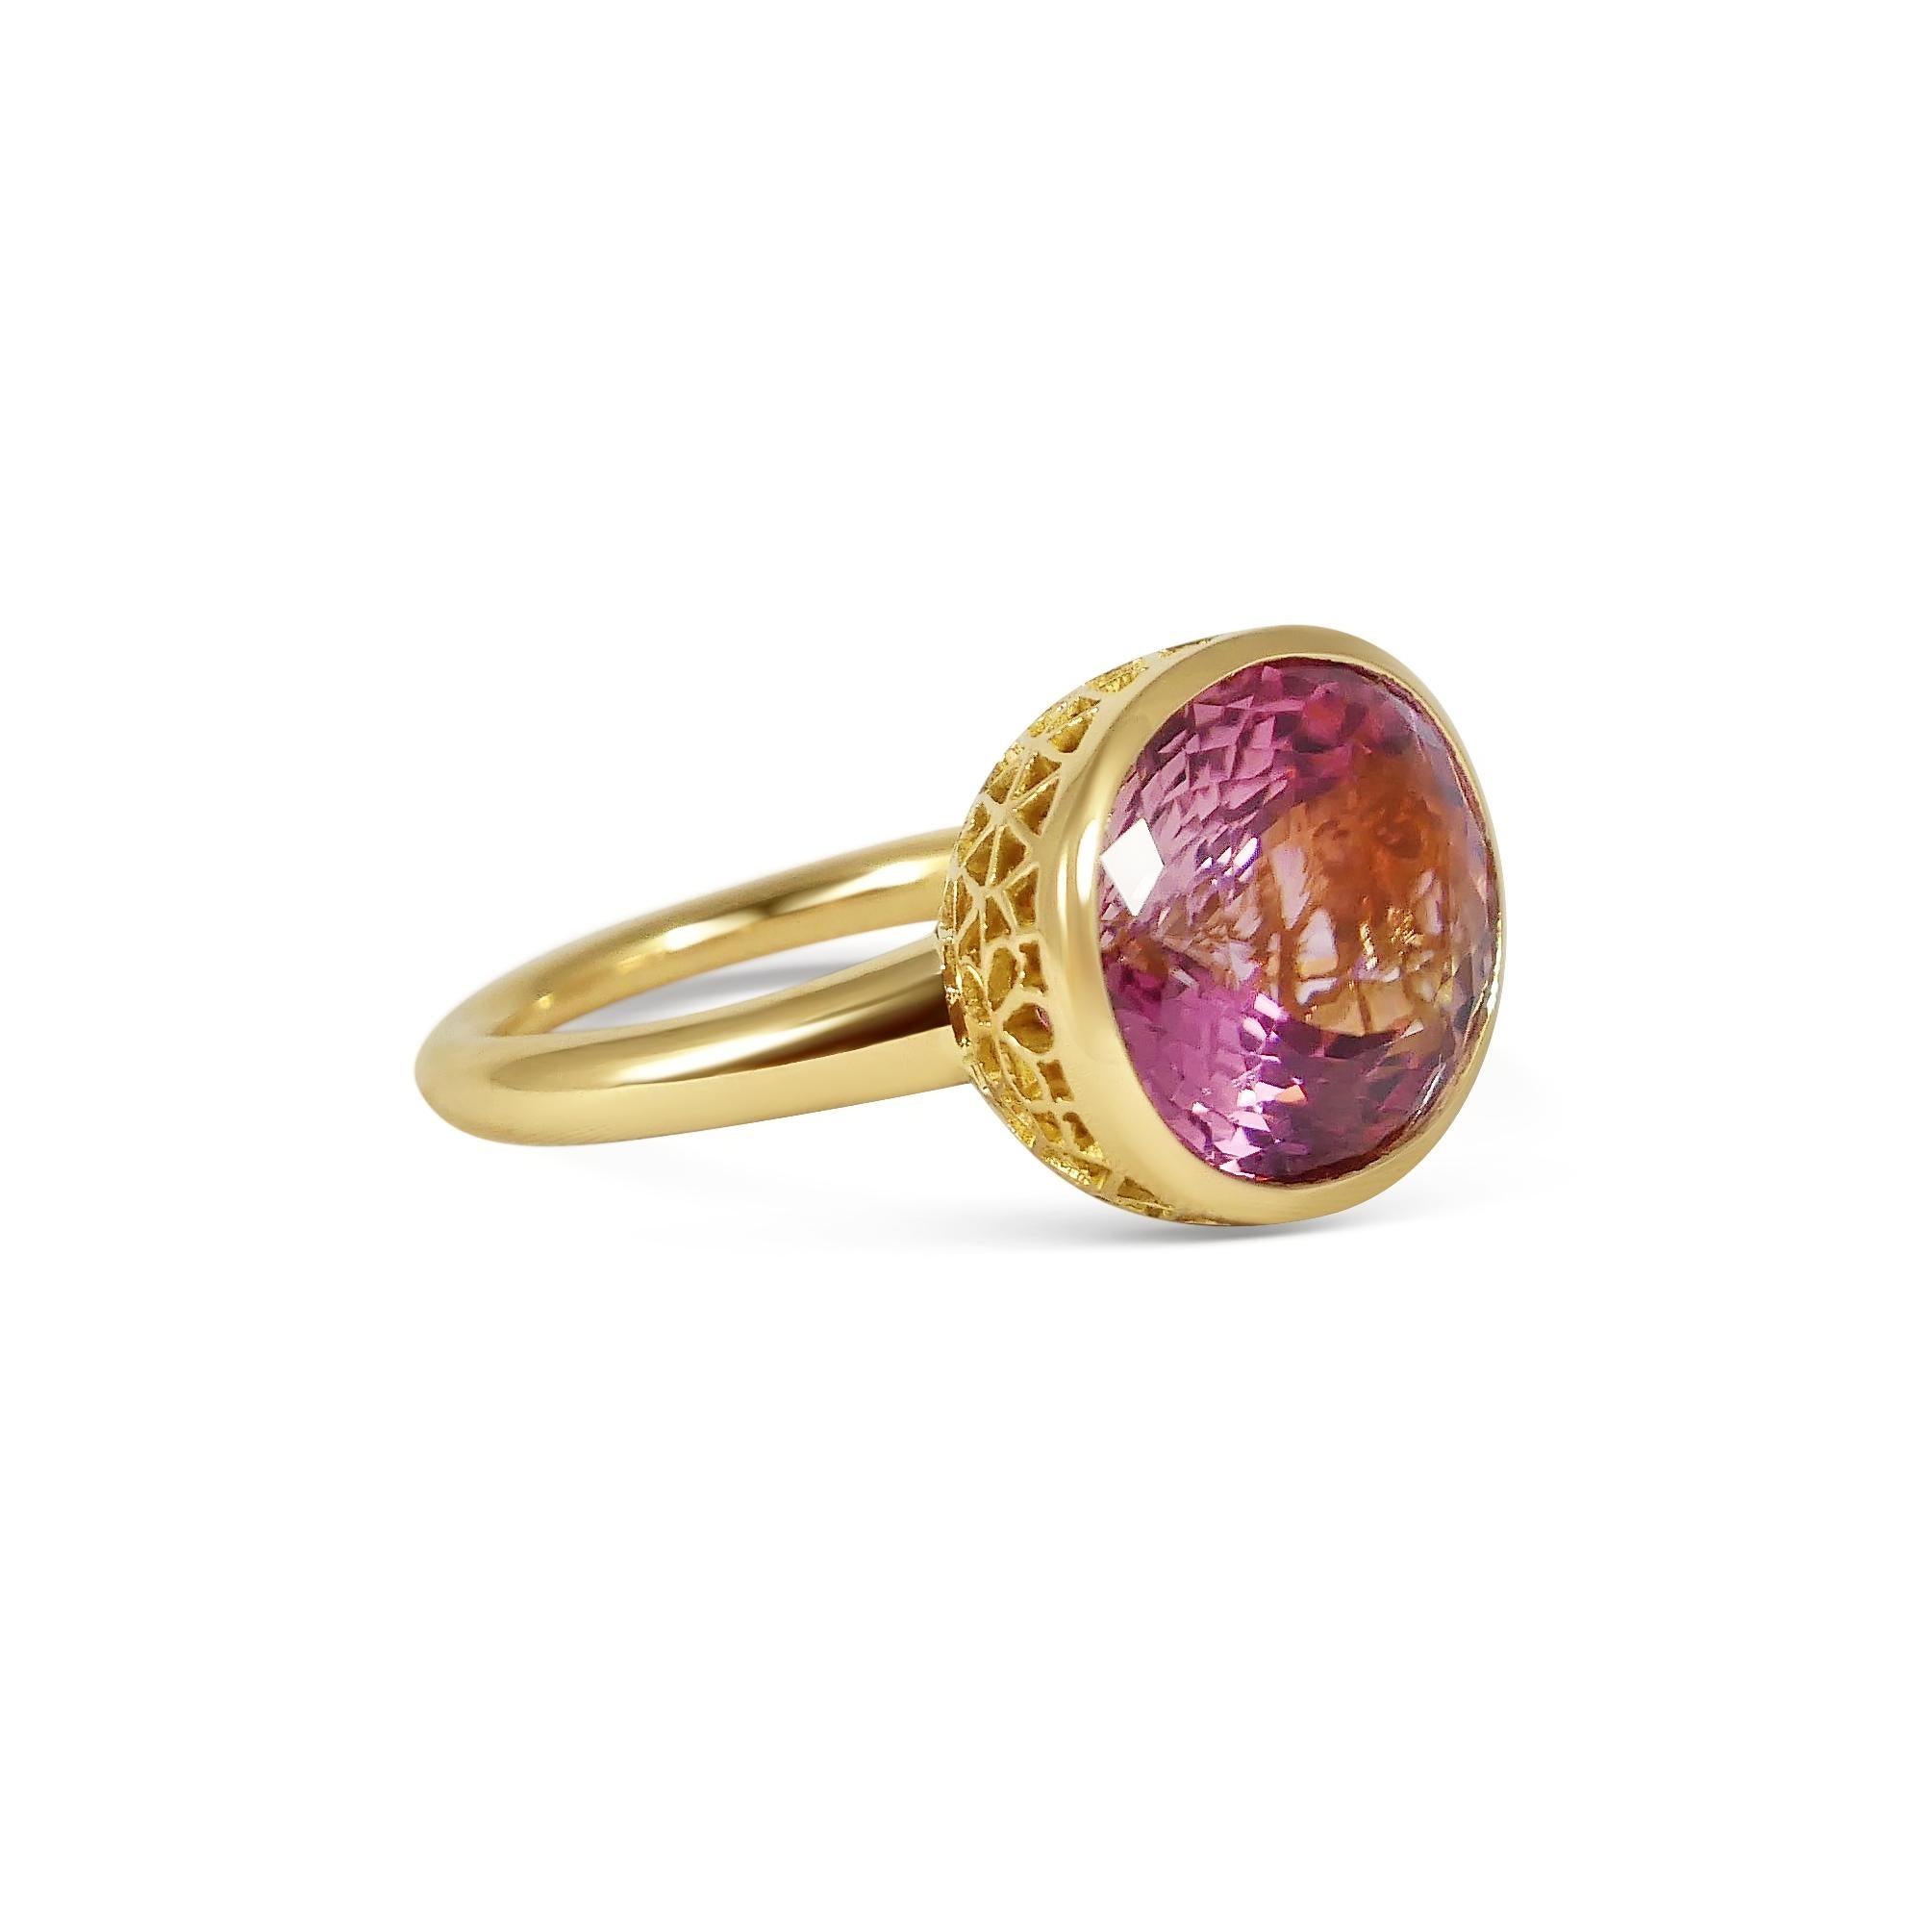 Handcrafted Oval Cut 13,95 Carats Pink Tourmaline 18 Karat Yellow Gold Cocktail Ring. Our expert craftsmen hand pierce our iconic gold lace to fit each stone on a tapered band making each ring One of a Kind. This unique technique, inspired by our